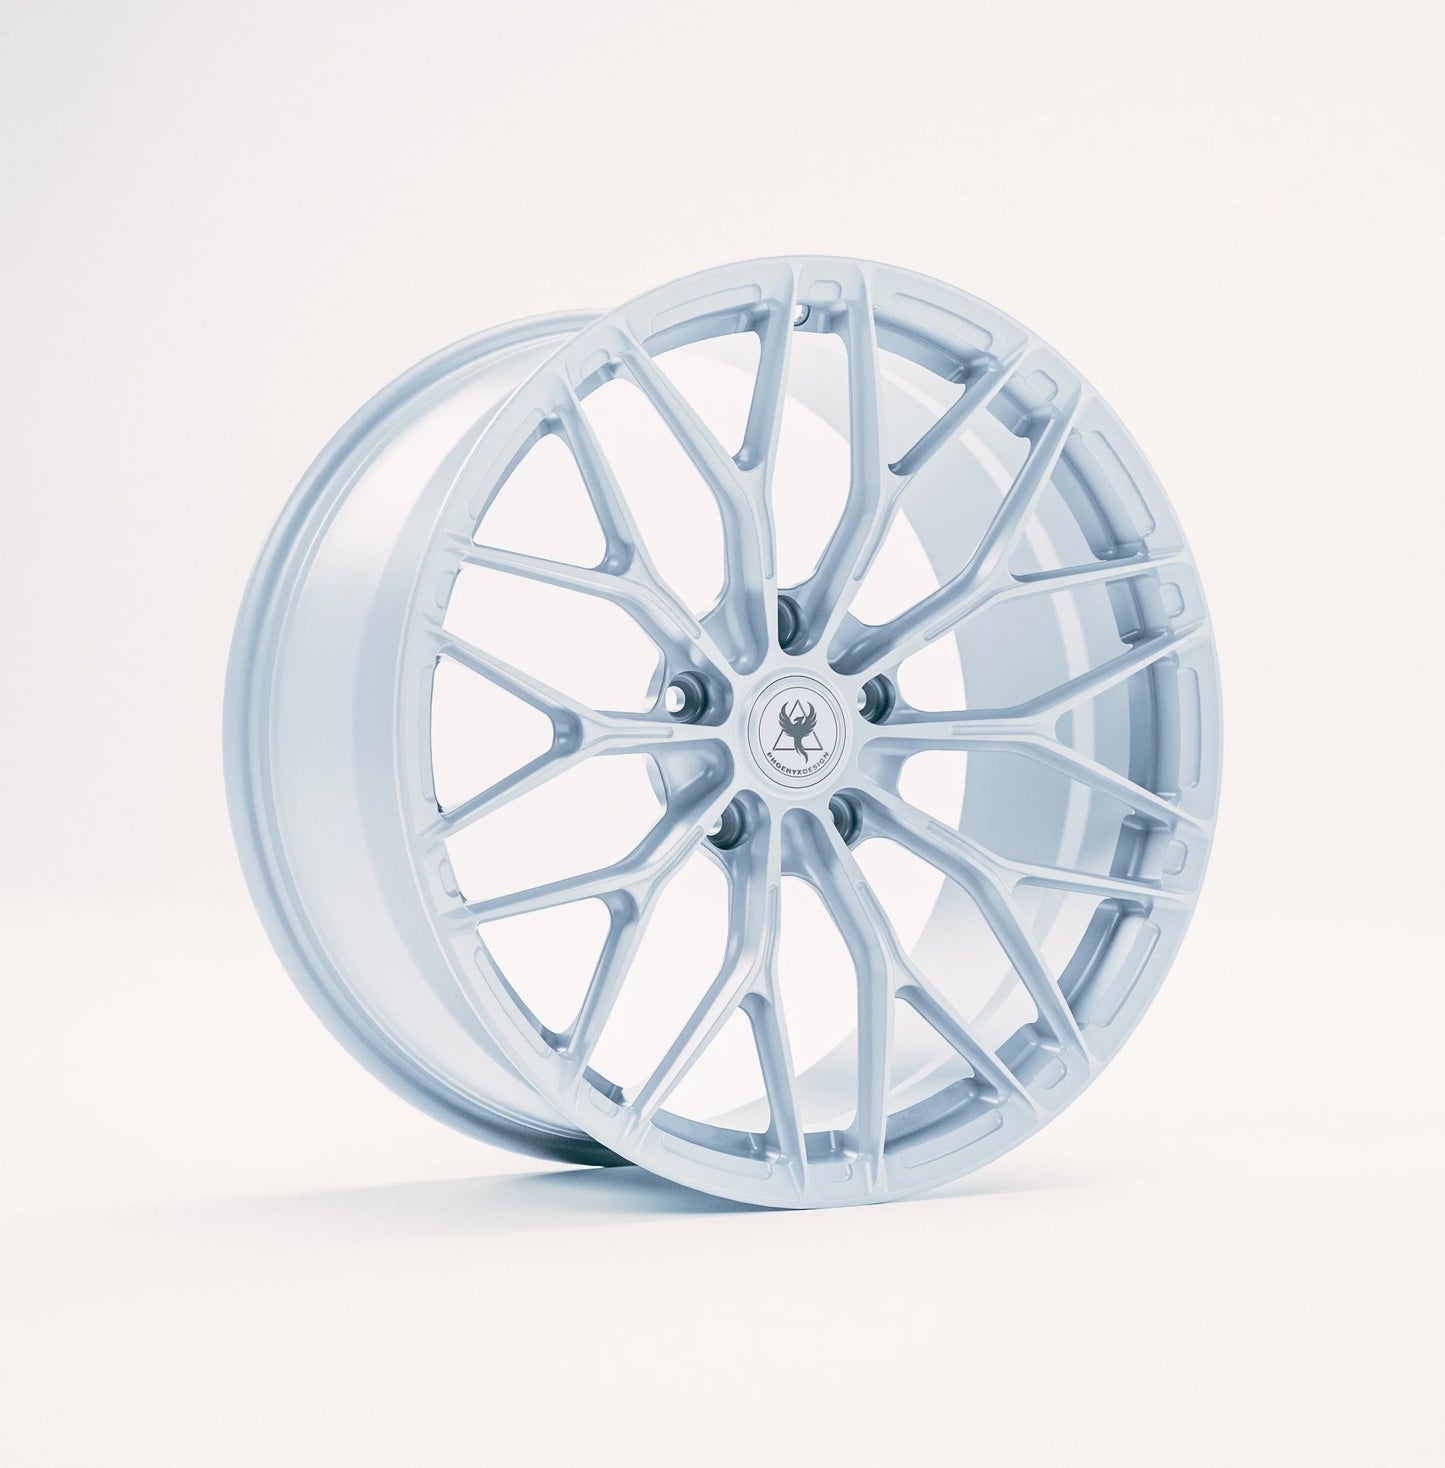 Phoenyx Design Forged Wheel | PD-111